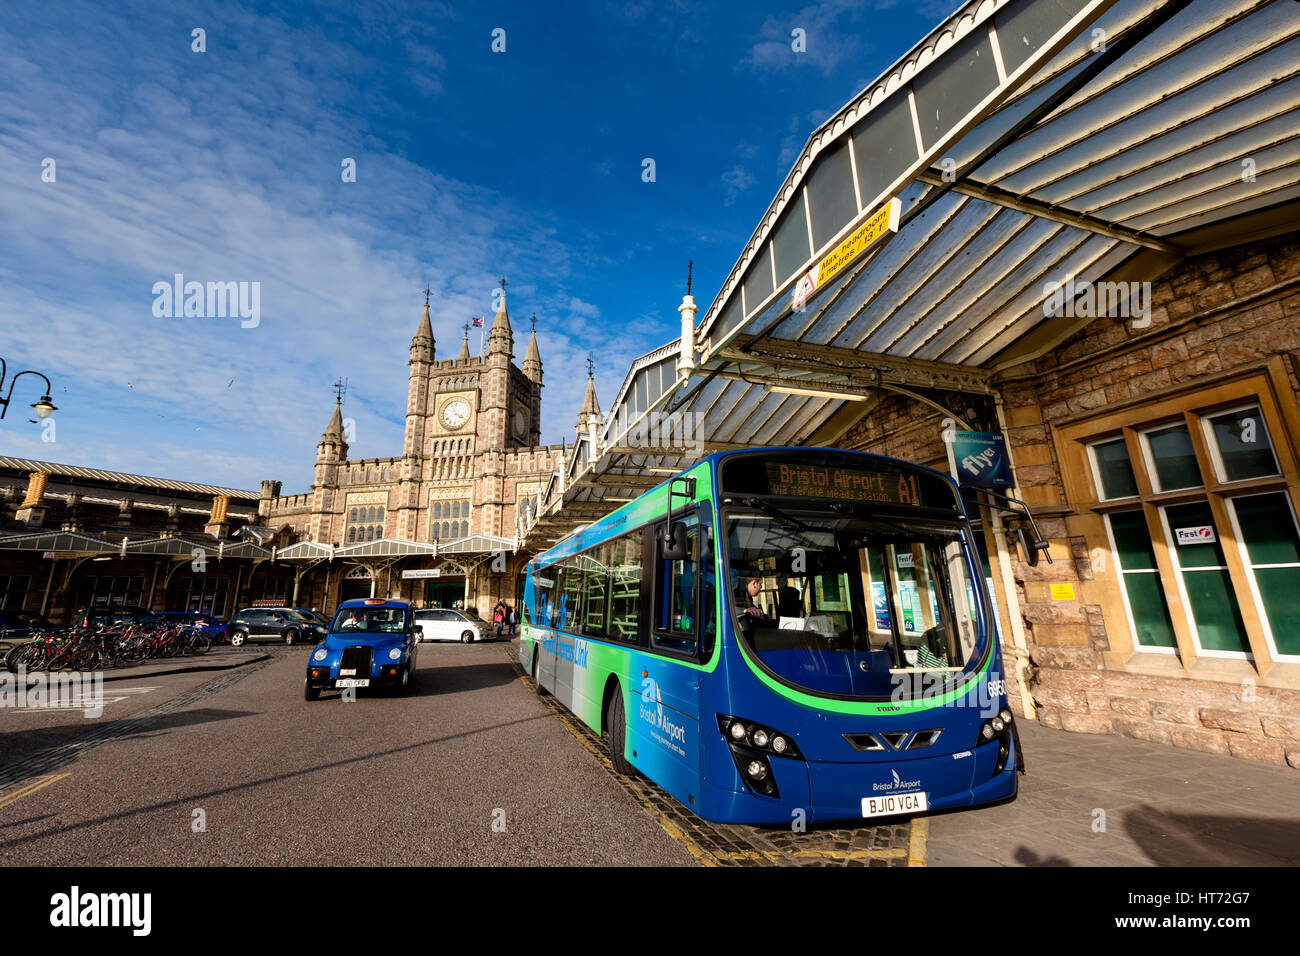 BRISTOL, UK - March 14, 2011: Exterior of Bristol Temple Meads Railway Station with a stationary Bristol Airport Shuttle Bus and passing Taxi Stock Photo